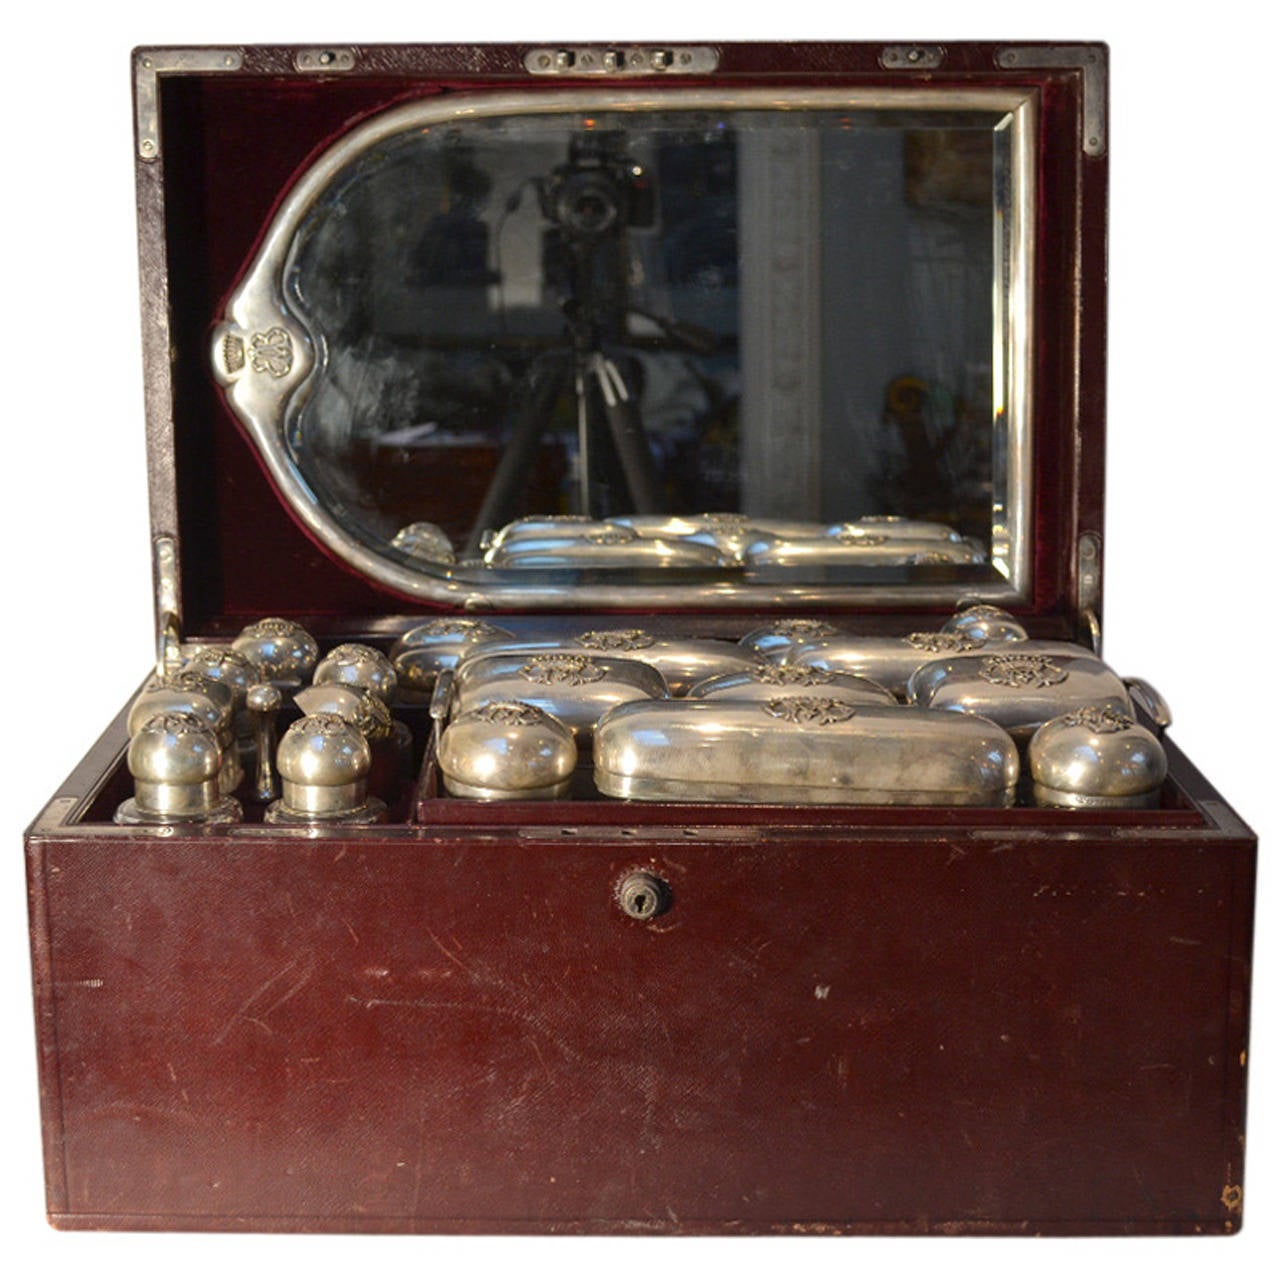 Necessaire or Traveling Case from an Italian Noble Family For Sale